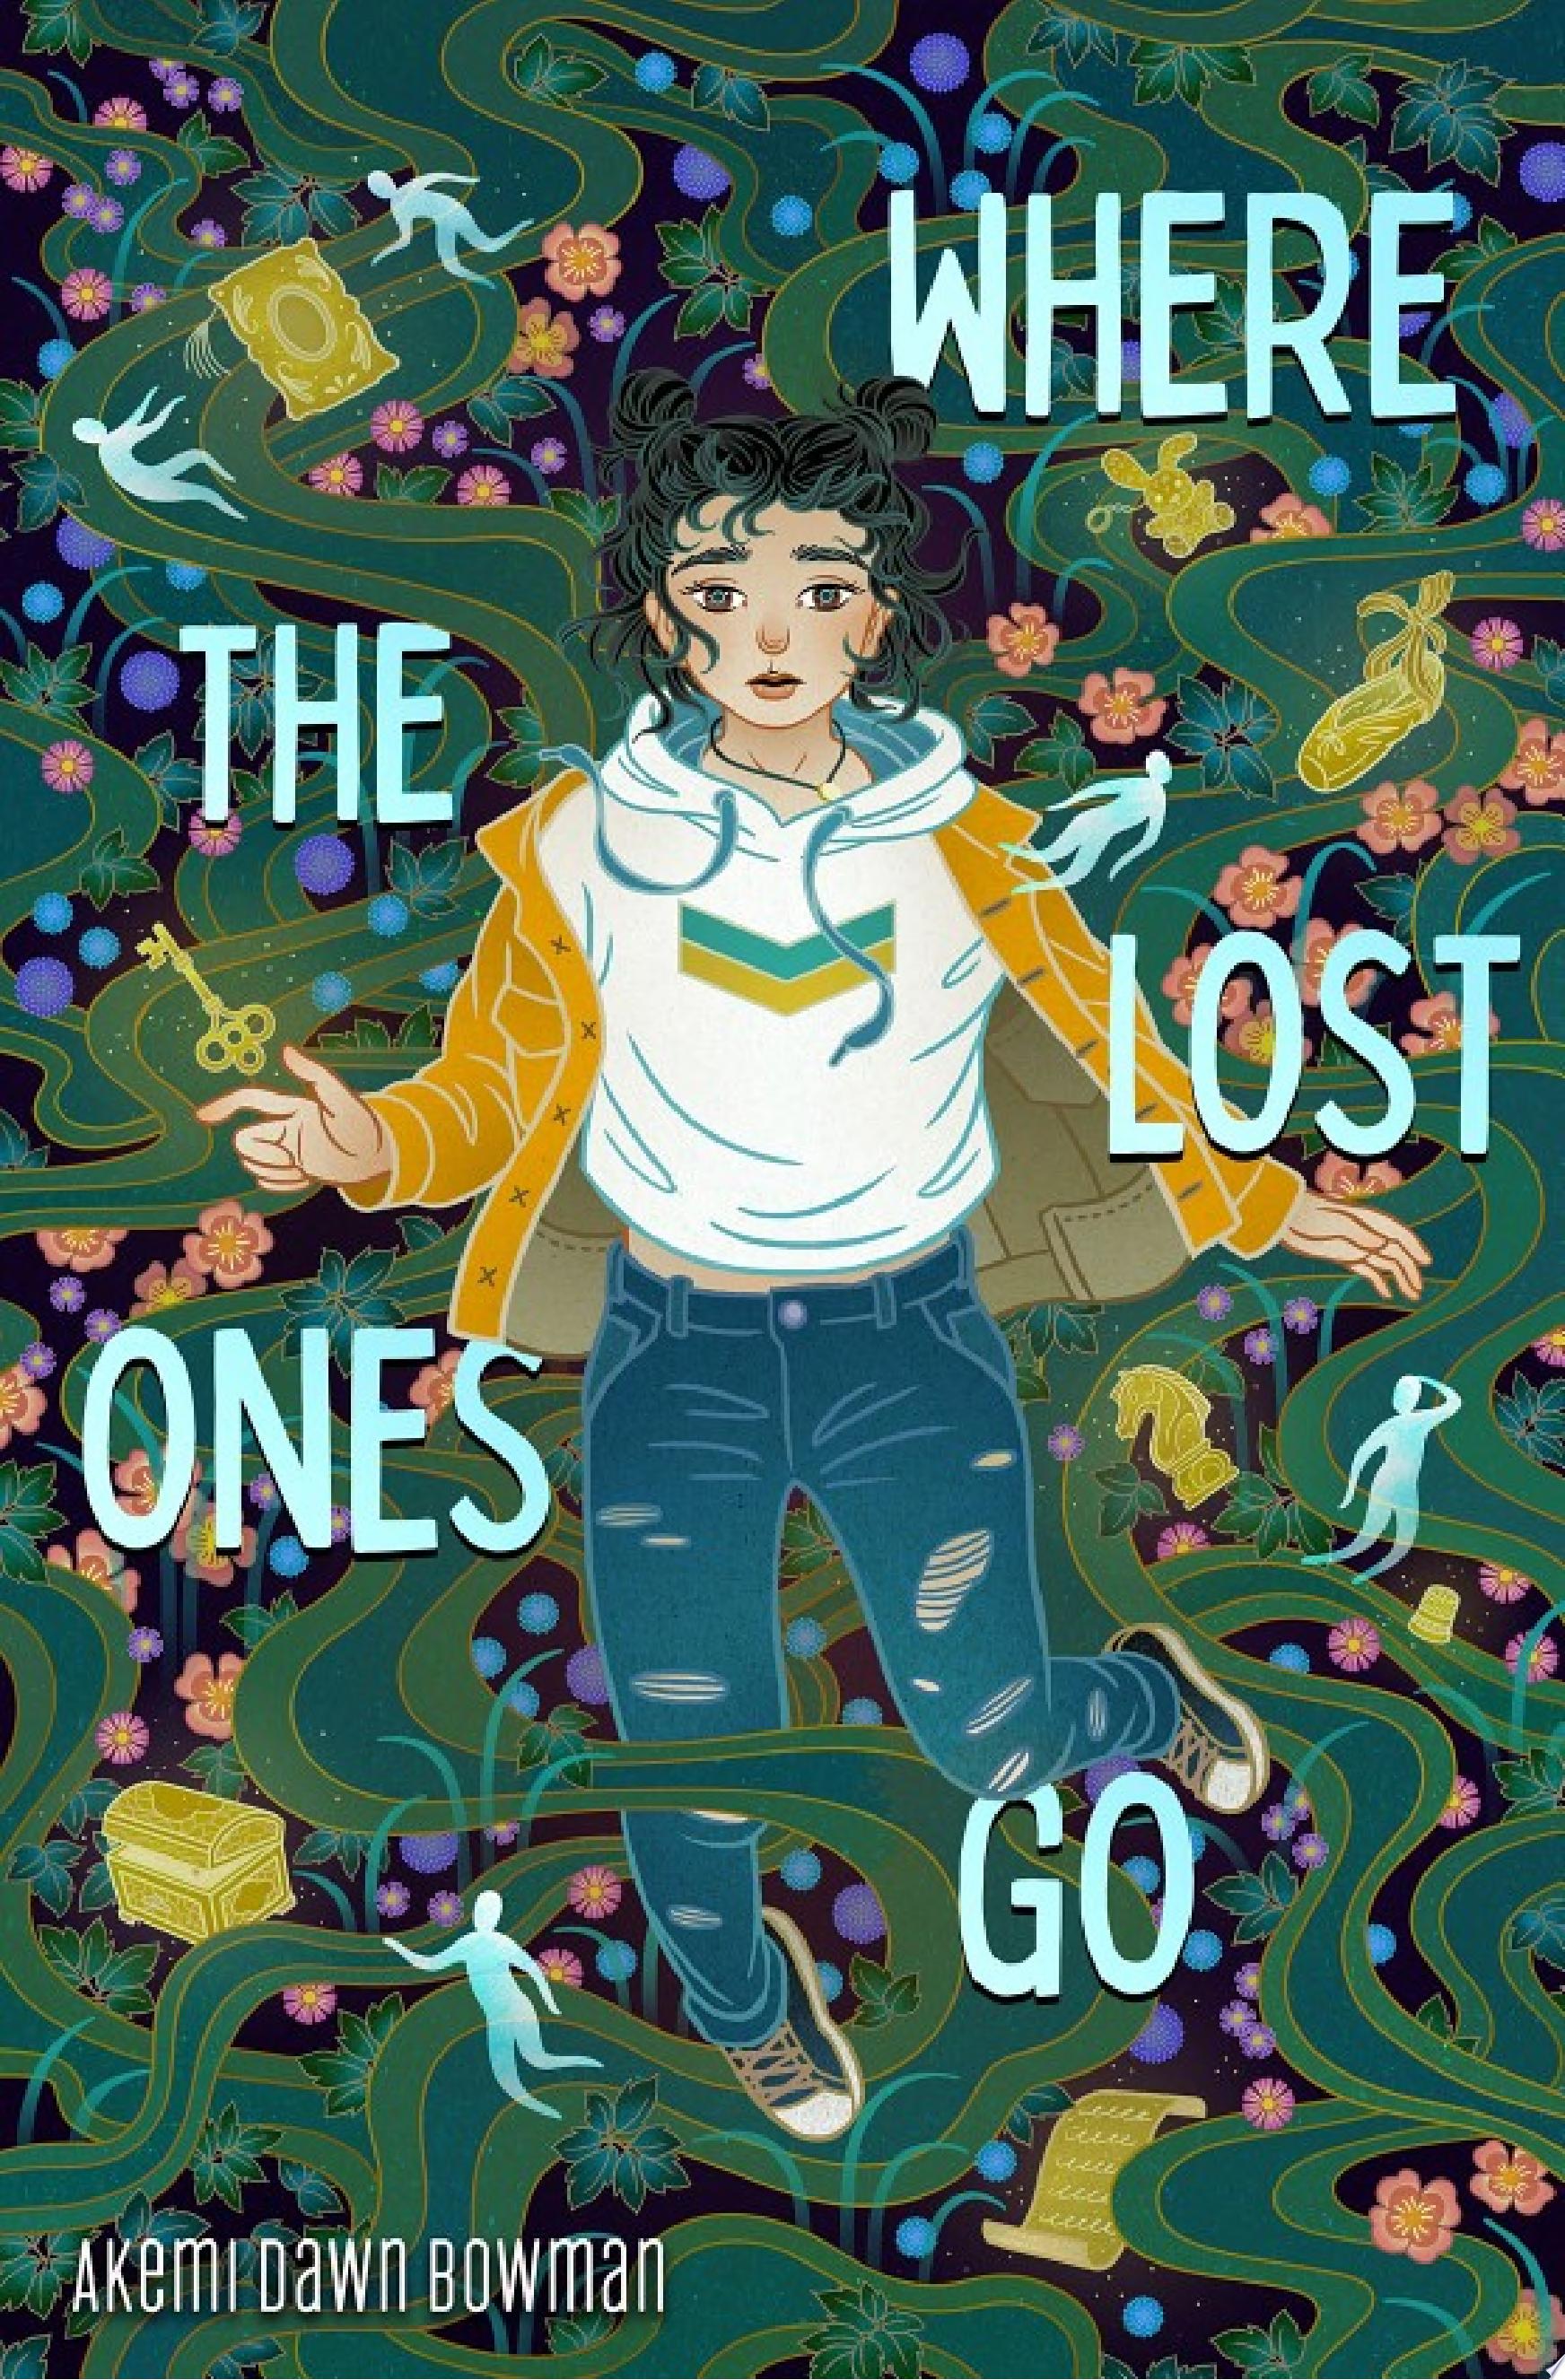 Image for "Where the Lost Ones Go"